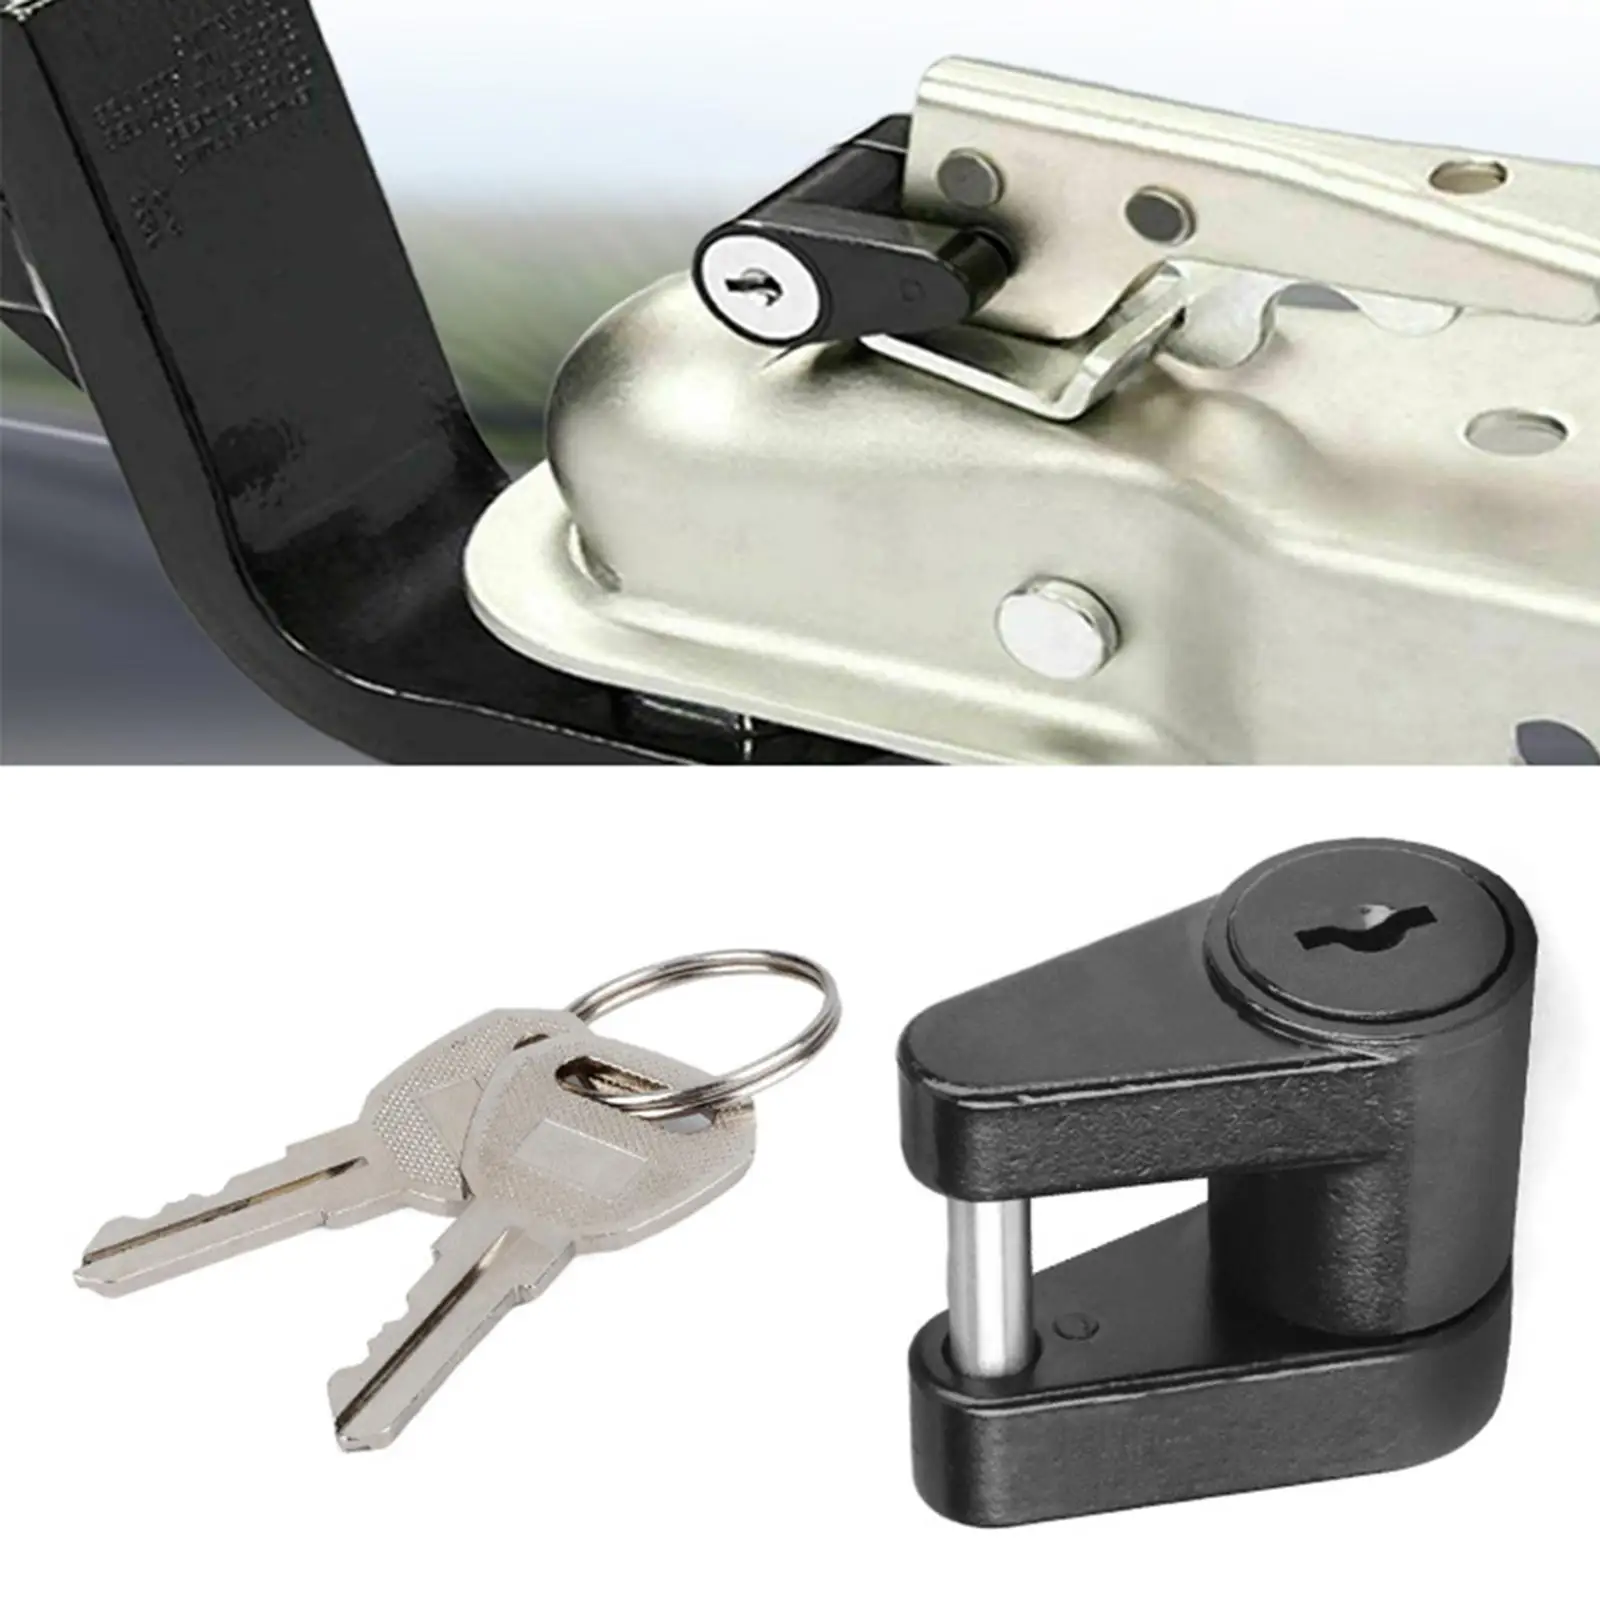 Trailer Coupler Lock with 2 Keys 1/4 inch pin 3/4 inch Span for Car`S Coupler Tow Boat Construction Vehicles RV Truck